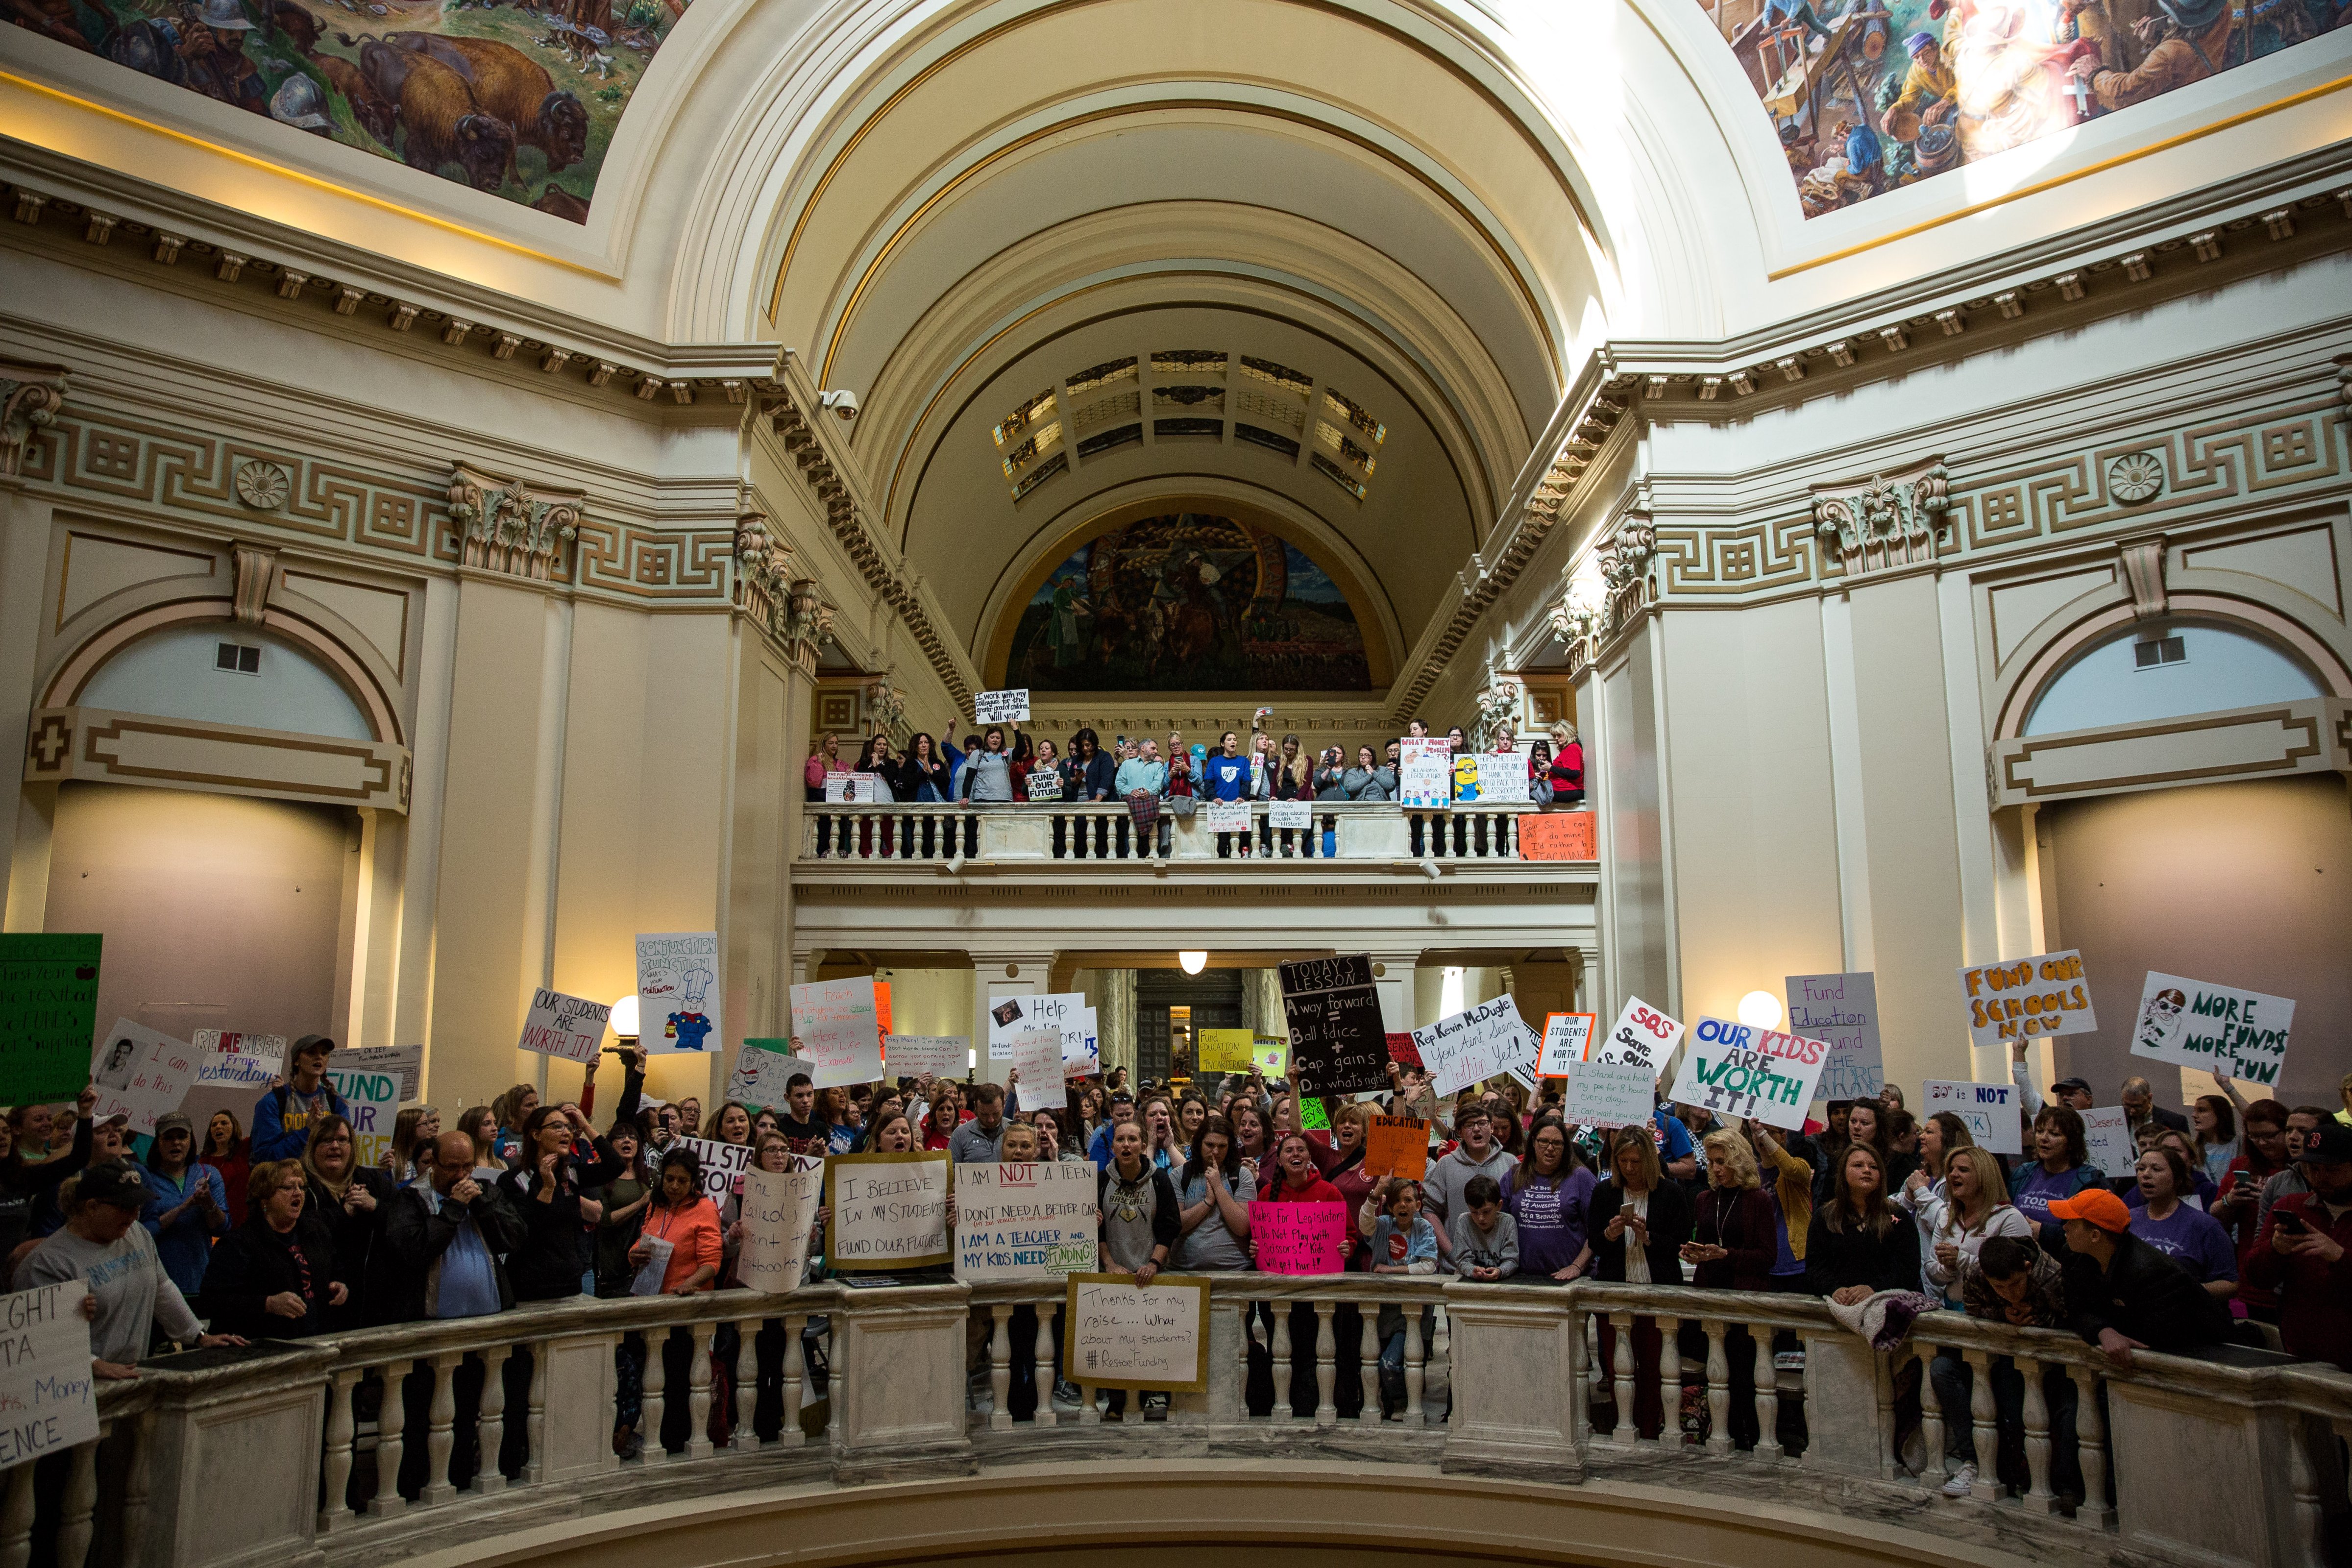 Thousands rallied at the Oklahoma state Capitol building during the third day of a statewide education walkout on April 4, 2018 in Oklahoma City, Oklahoma. (Scott Heins/Getty Images)